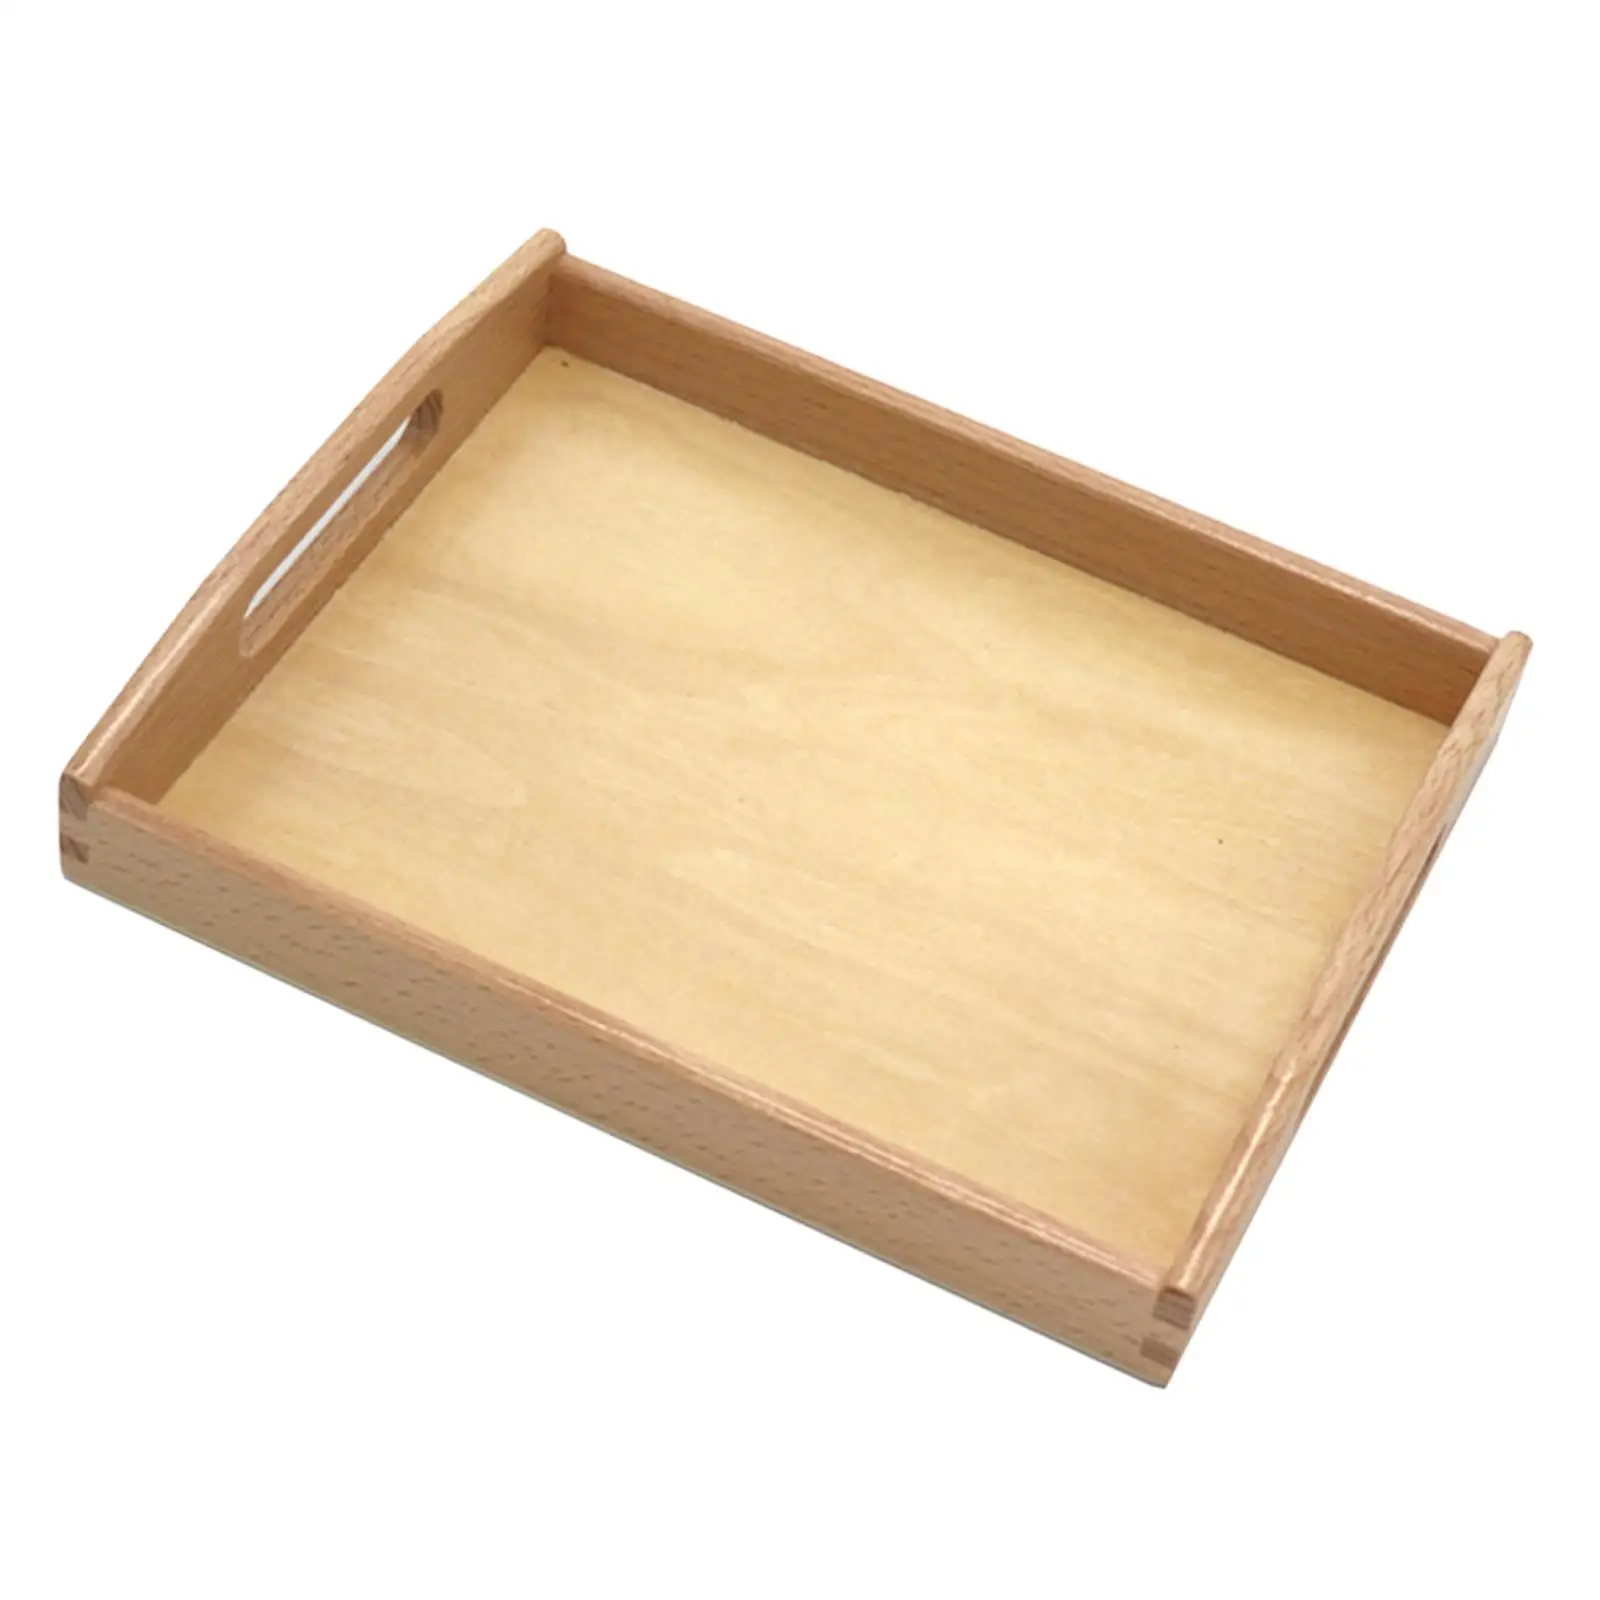 Montessori Wooden Tray Rectangular Shape Montessori Sand Tray Toy Display Light Durable Wood Serving Tray for Teaching Crafting